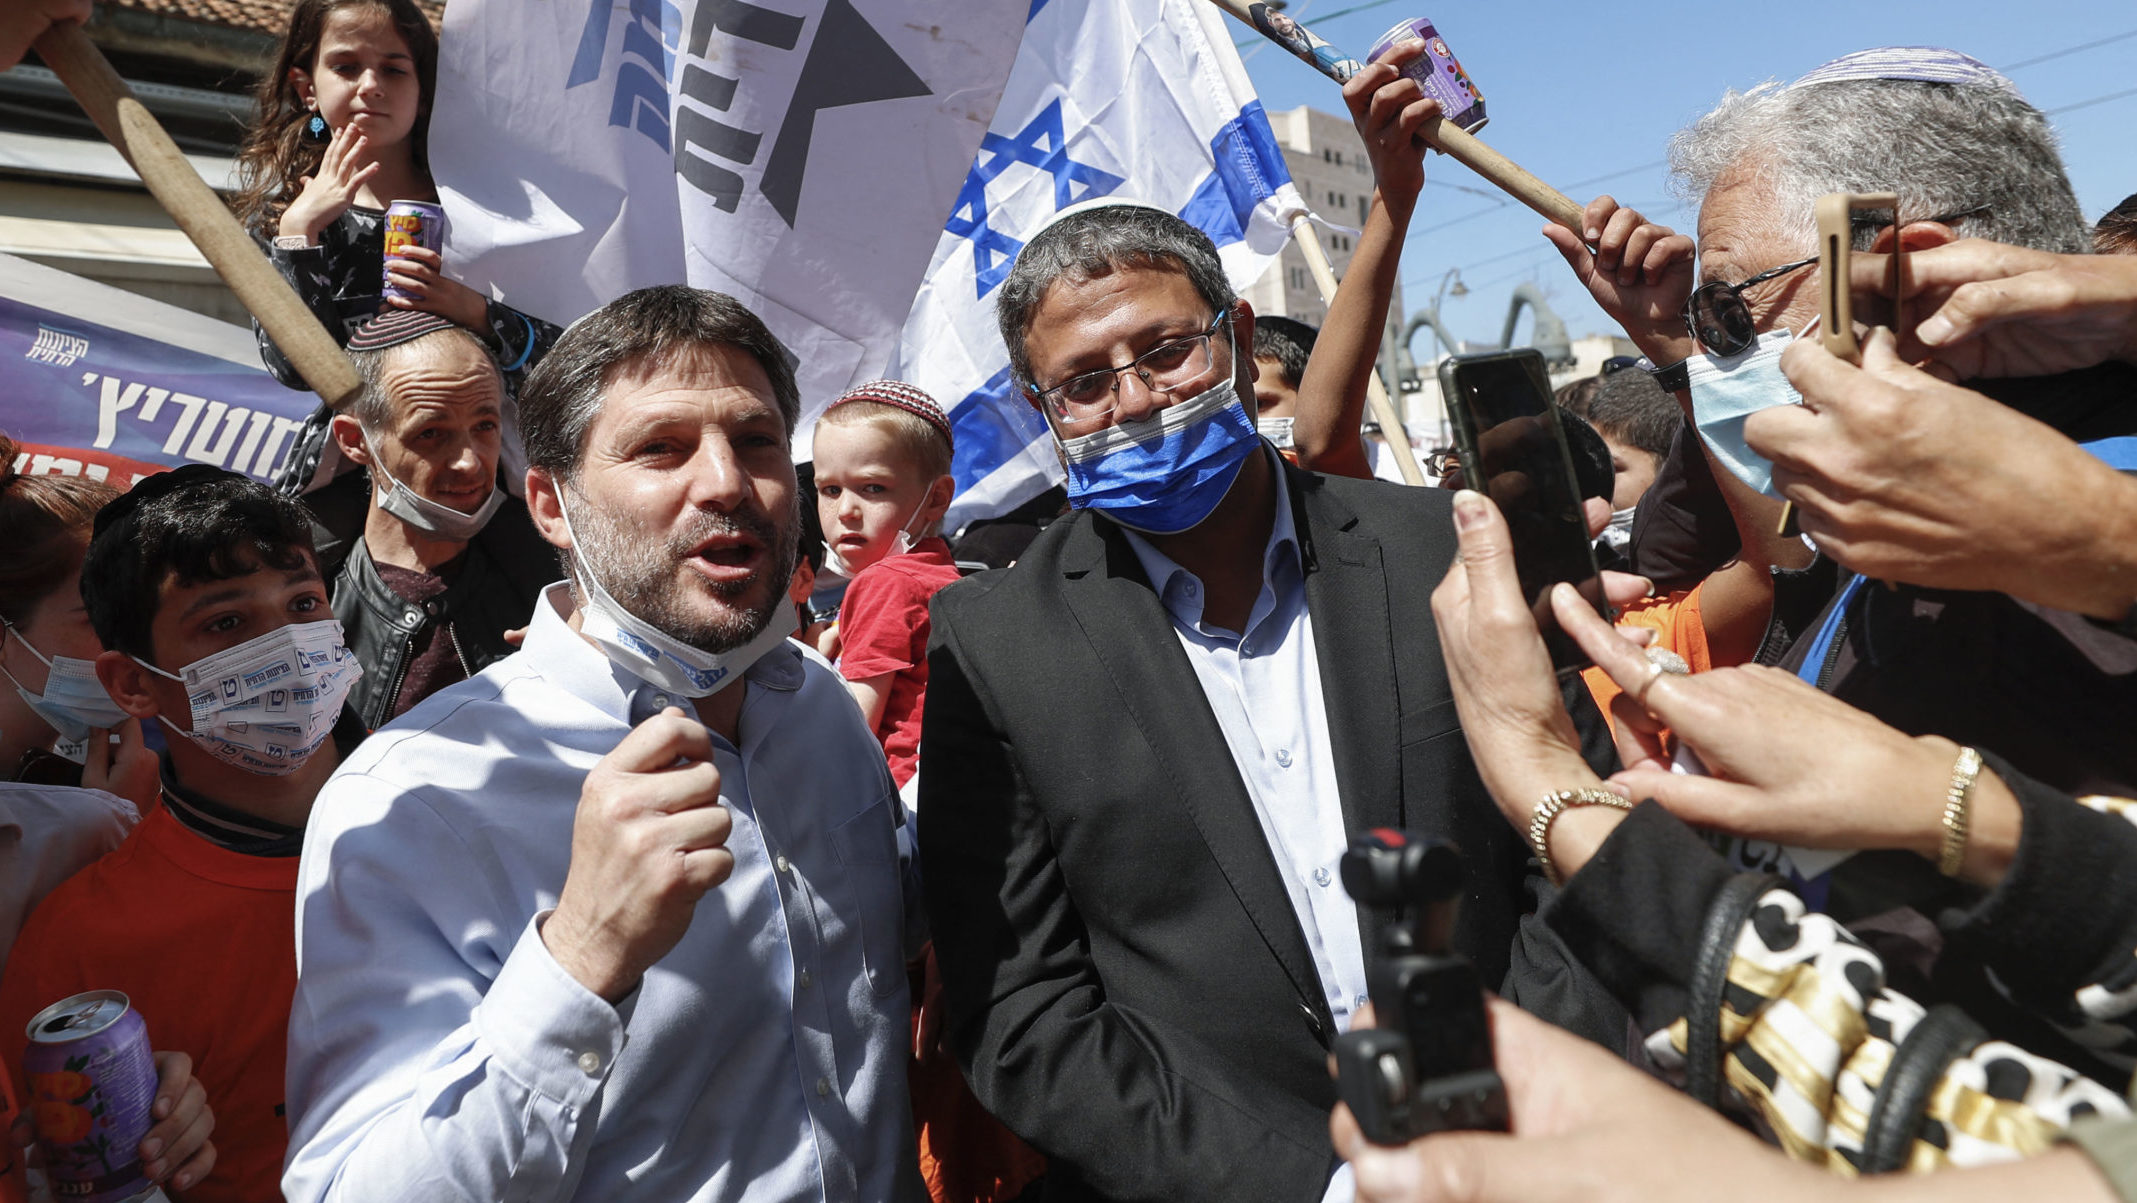 Israel’s Religious Zionism Party, Including Far-right Elements, Exceeds Electoral Expectations